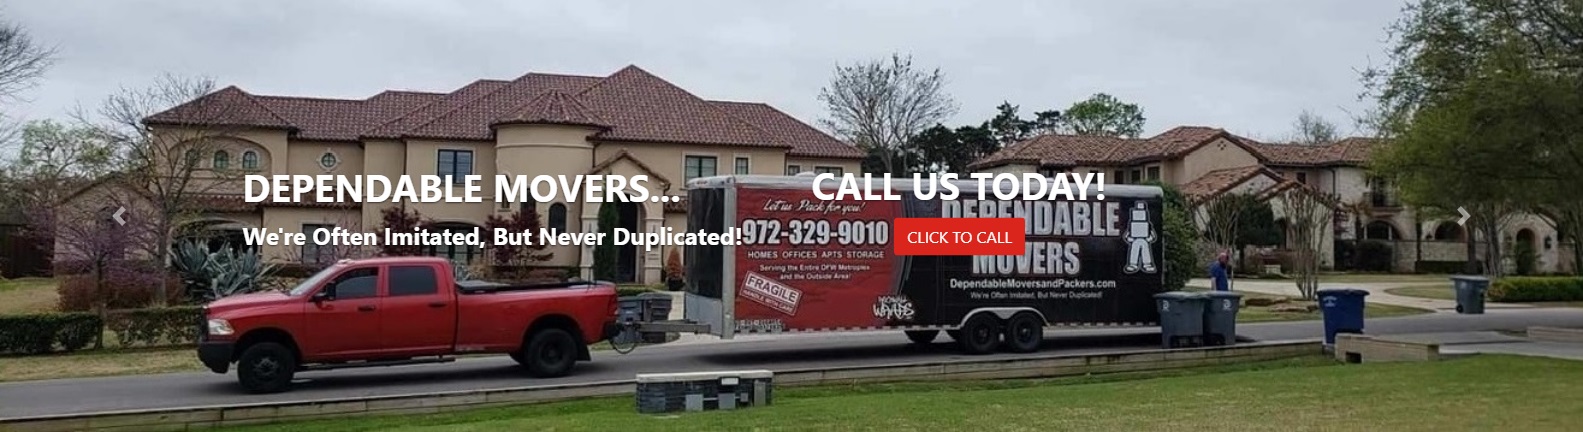 Dependable Movers Fort Worth Mover Fort Worth Moving Company - Home Office Apartment Movers Residential Commercial Movers in Fort Worth Texas